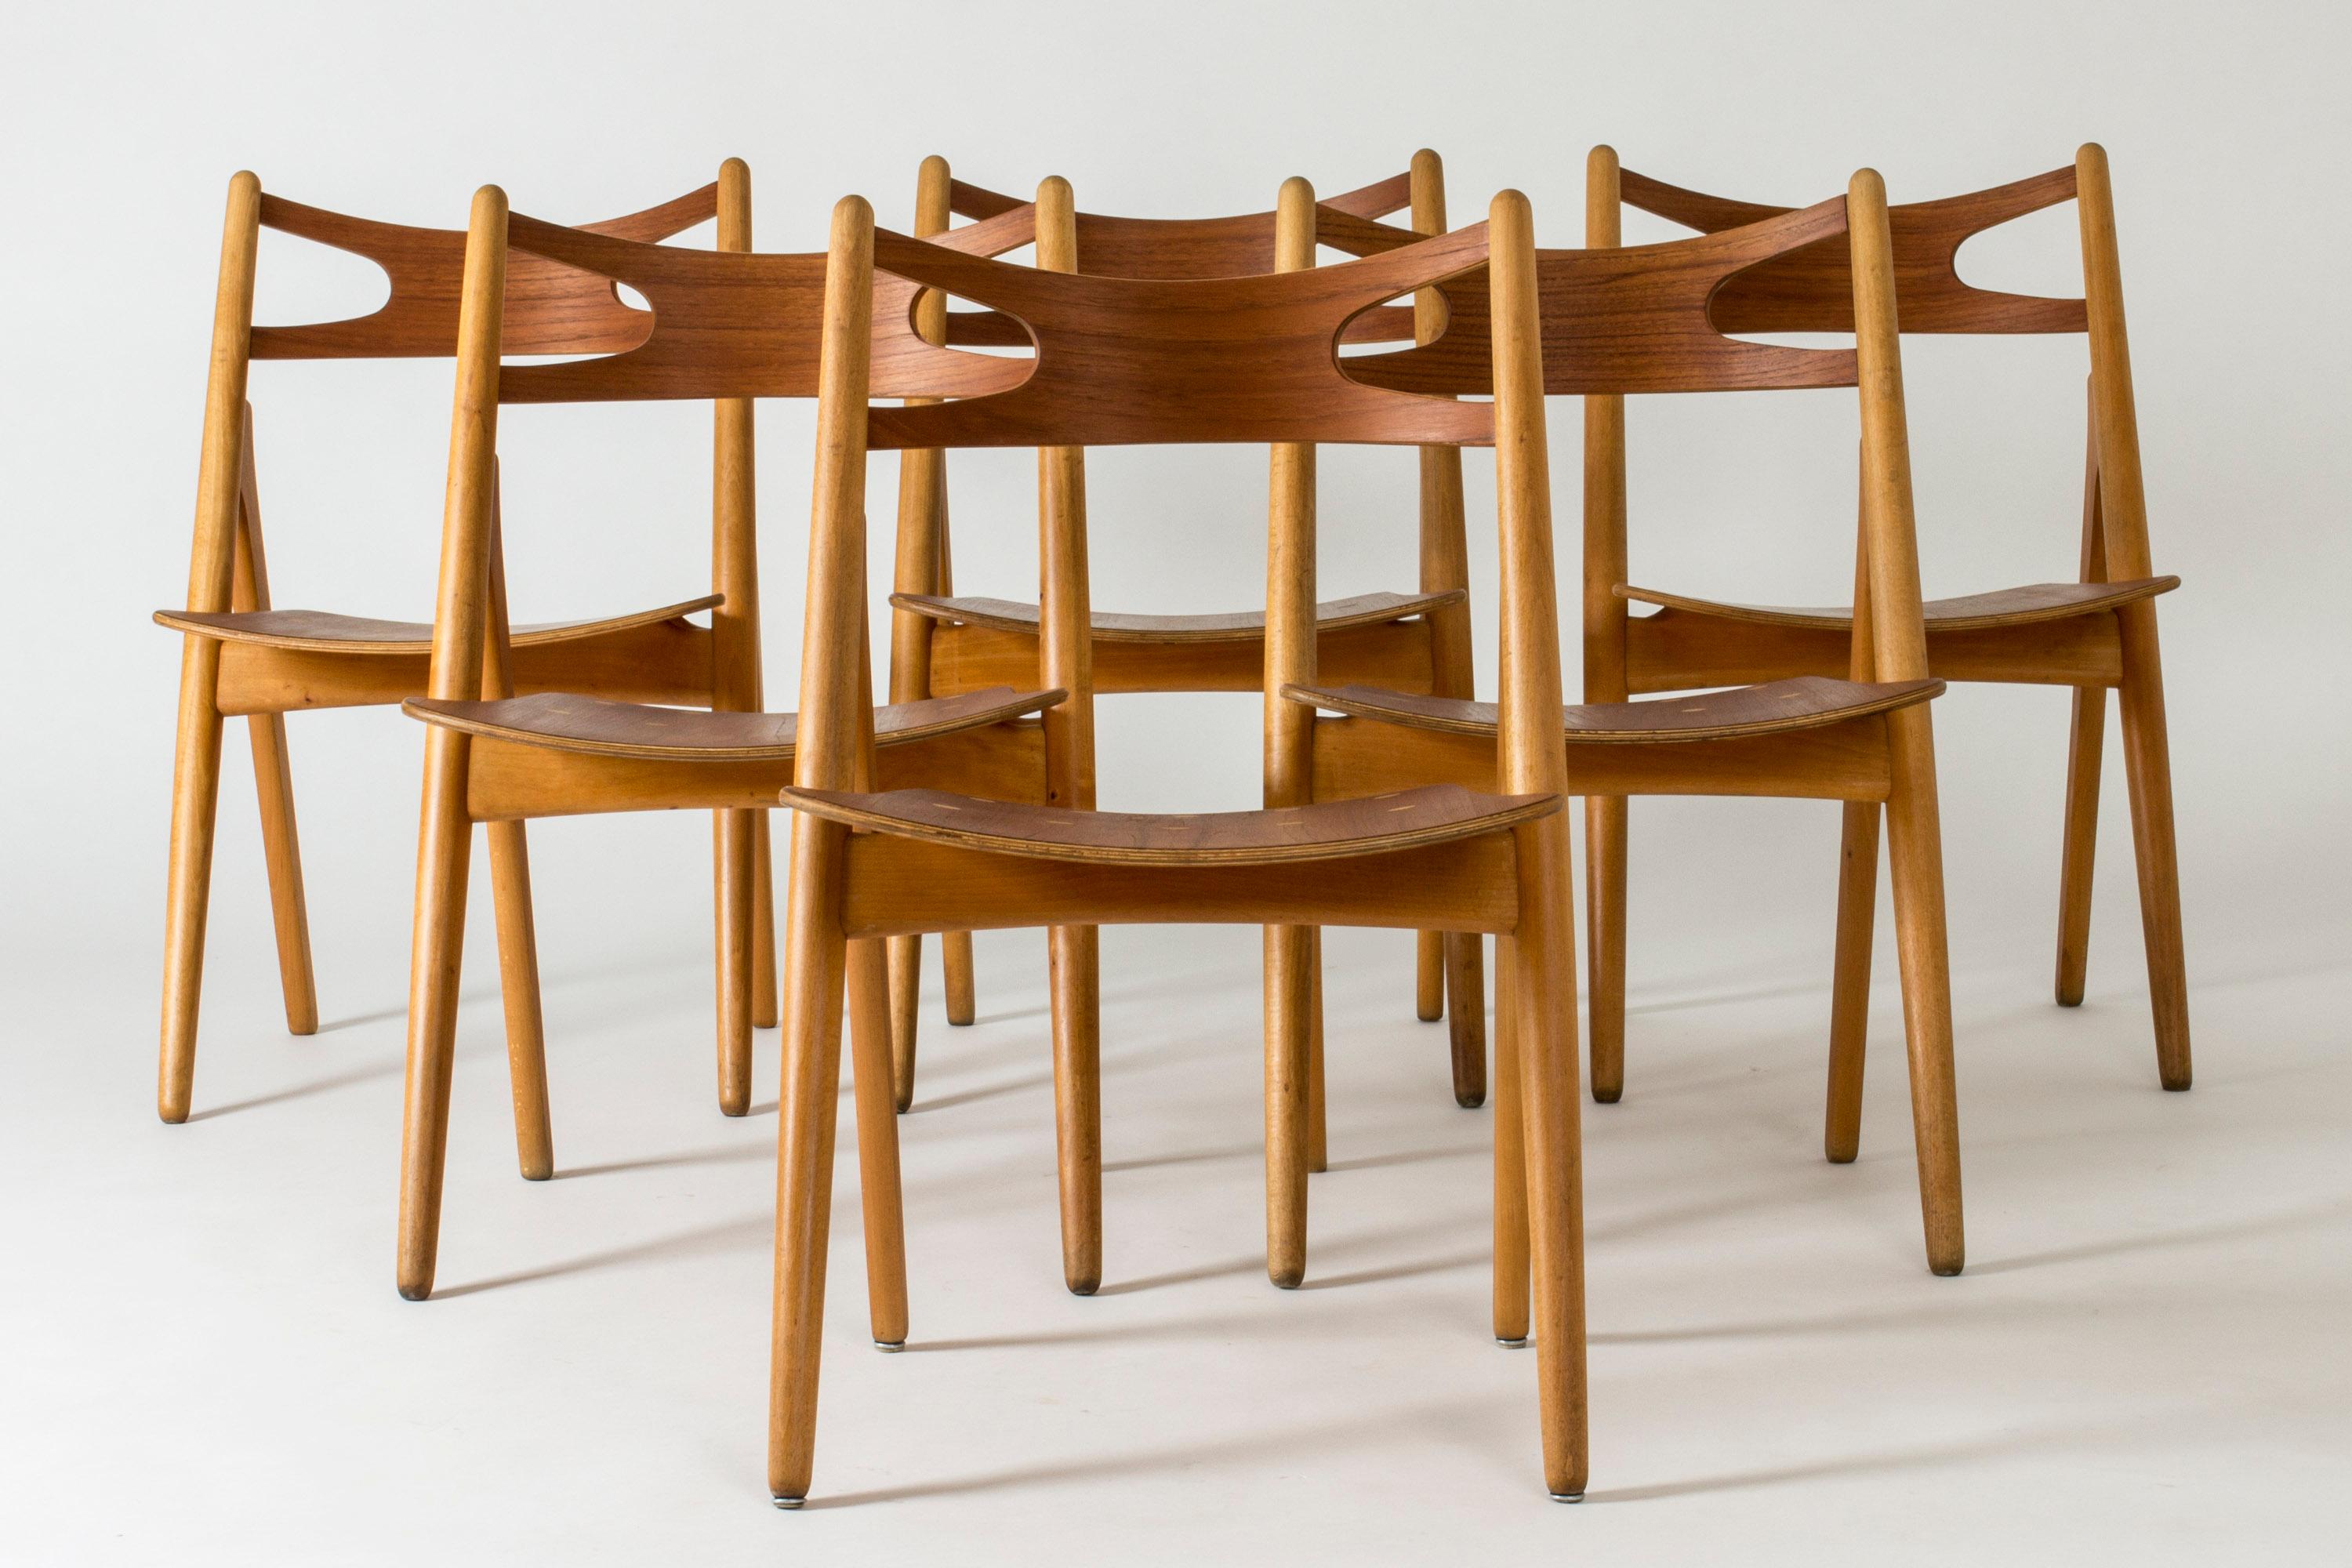 Set of six “Sawbuck” dining chairs by Hans J. Wegner, made from oak and teak. Decorative inlayed dots on the seats. Wonderful rustic design, great to sit on.